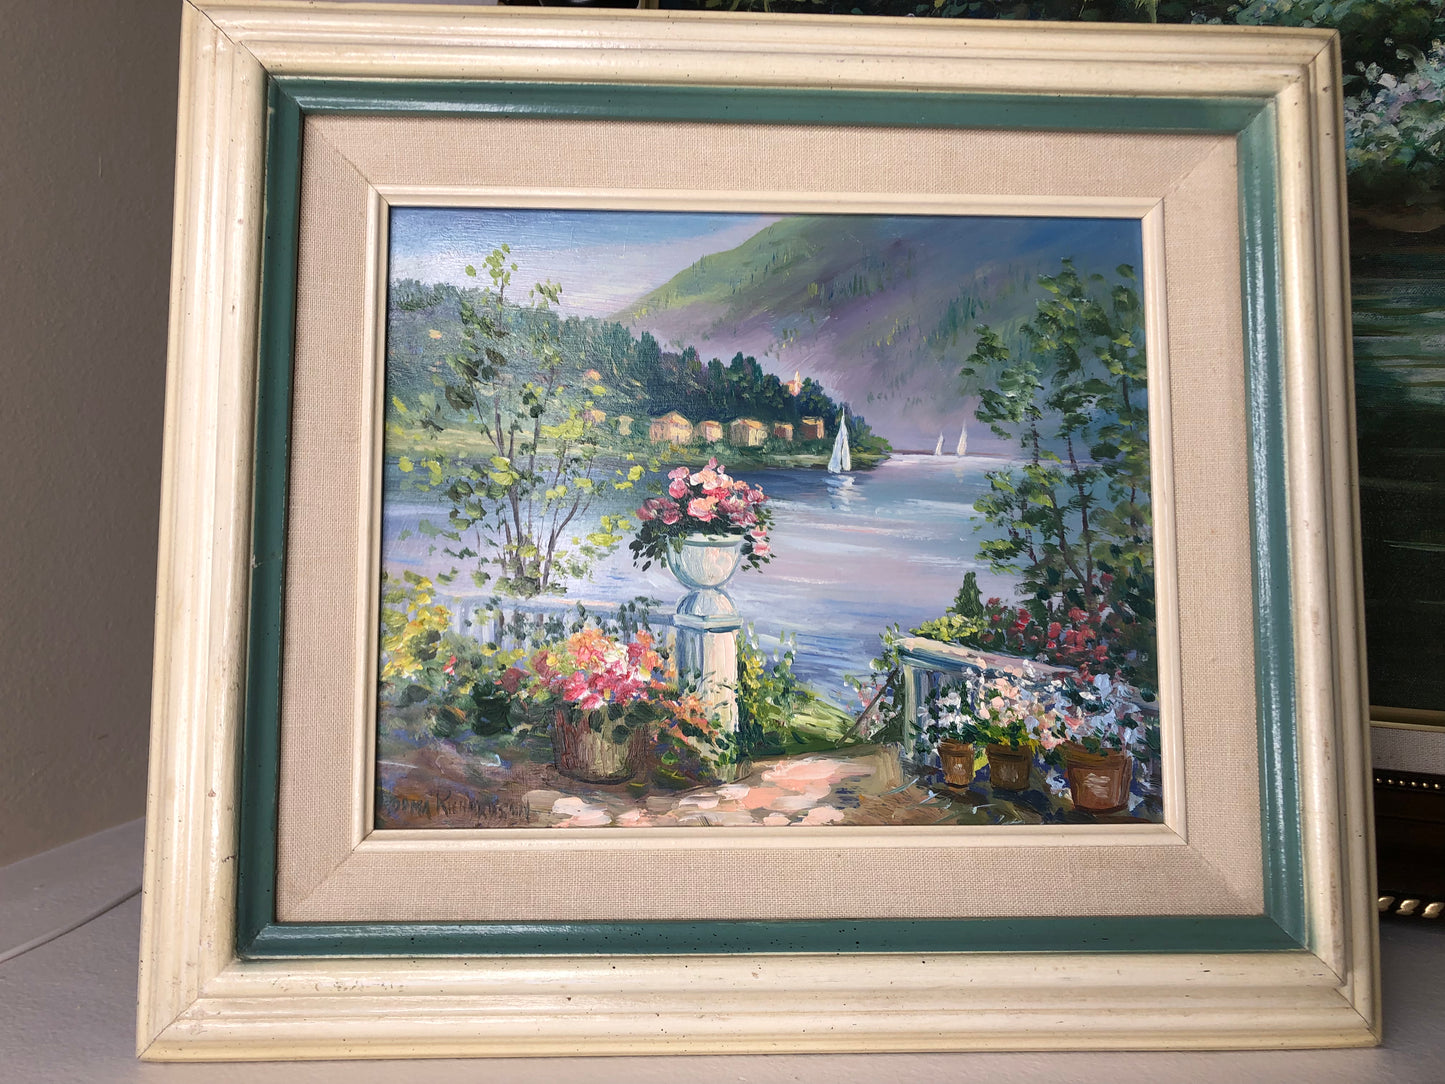 Gorgeous Original Oil on Board Painting of lakeside terrace with flowers signed by artist - Excellent condition!